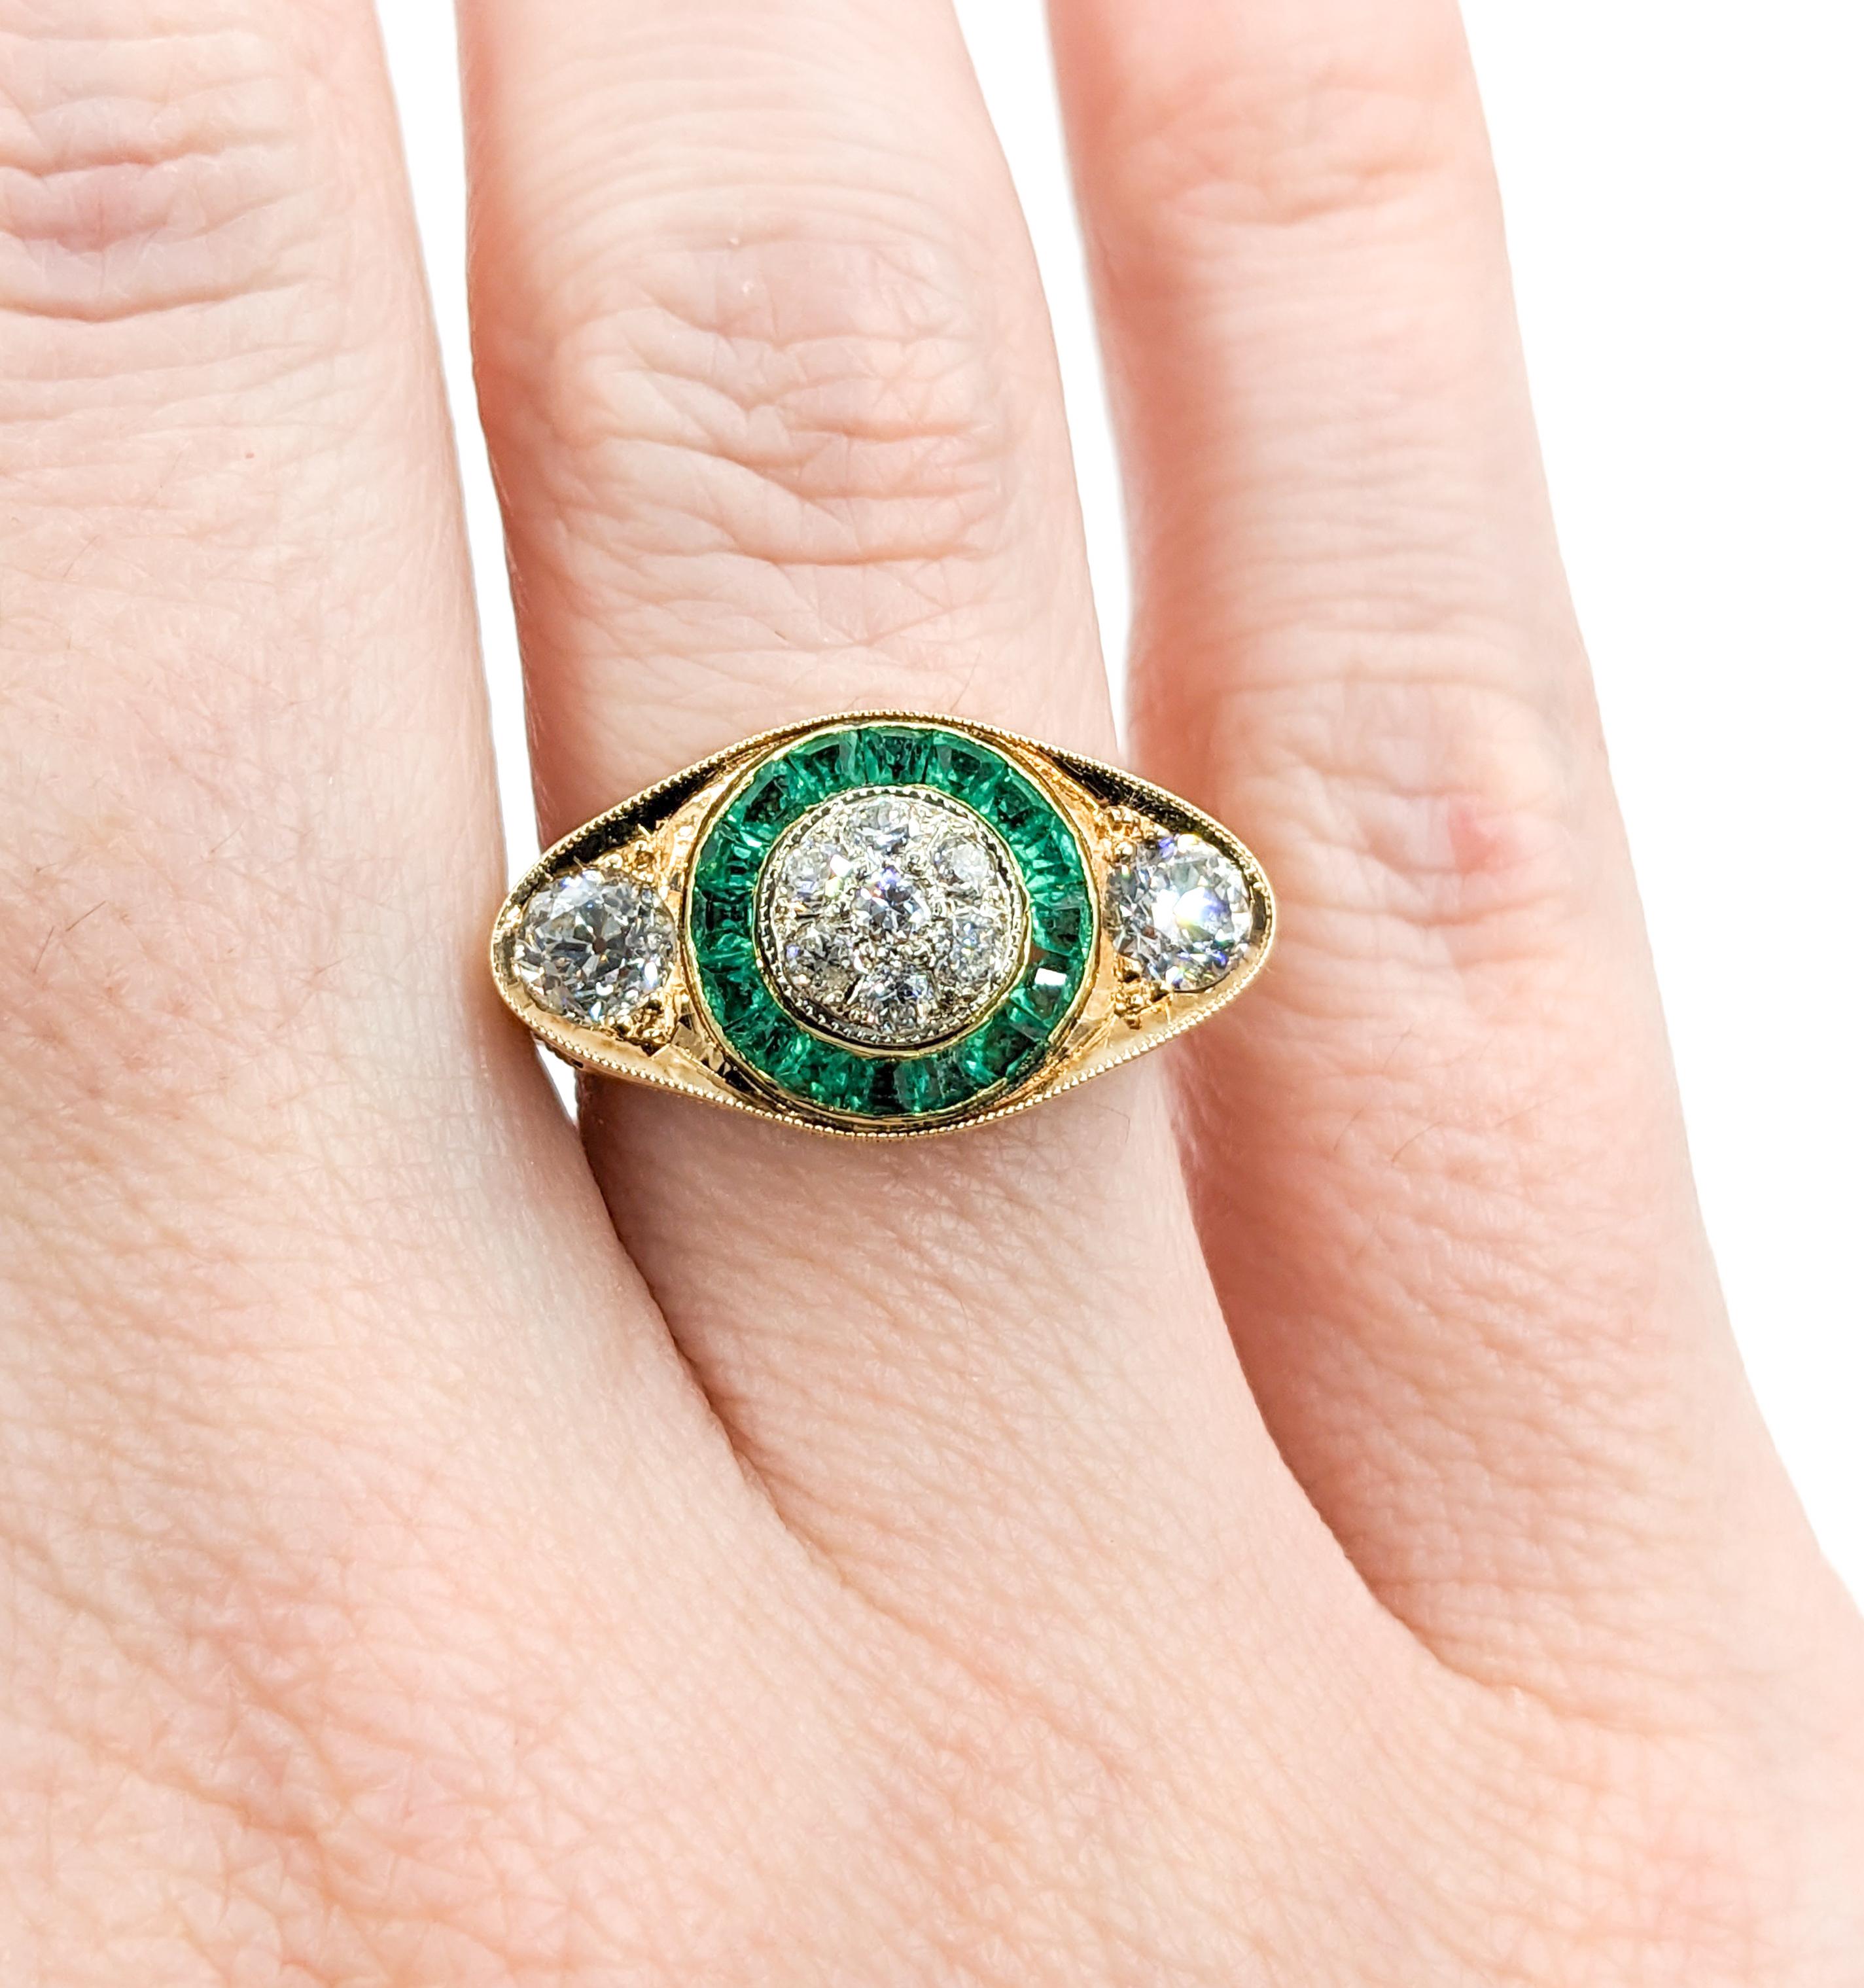 Antique Old European Diamond & Emeralds Target Ring in 14K Gold In Excellent Condition For Sale In Bloomington, MN